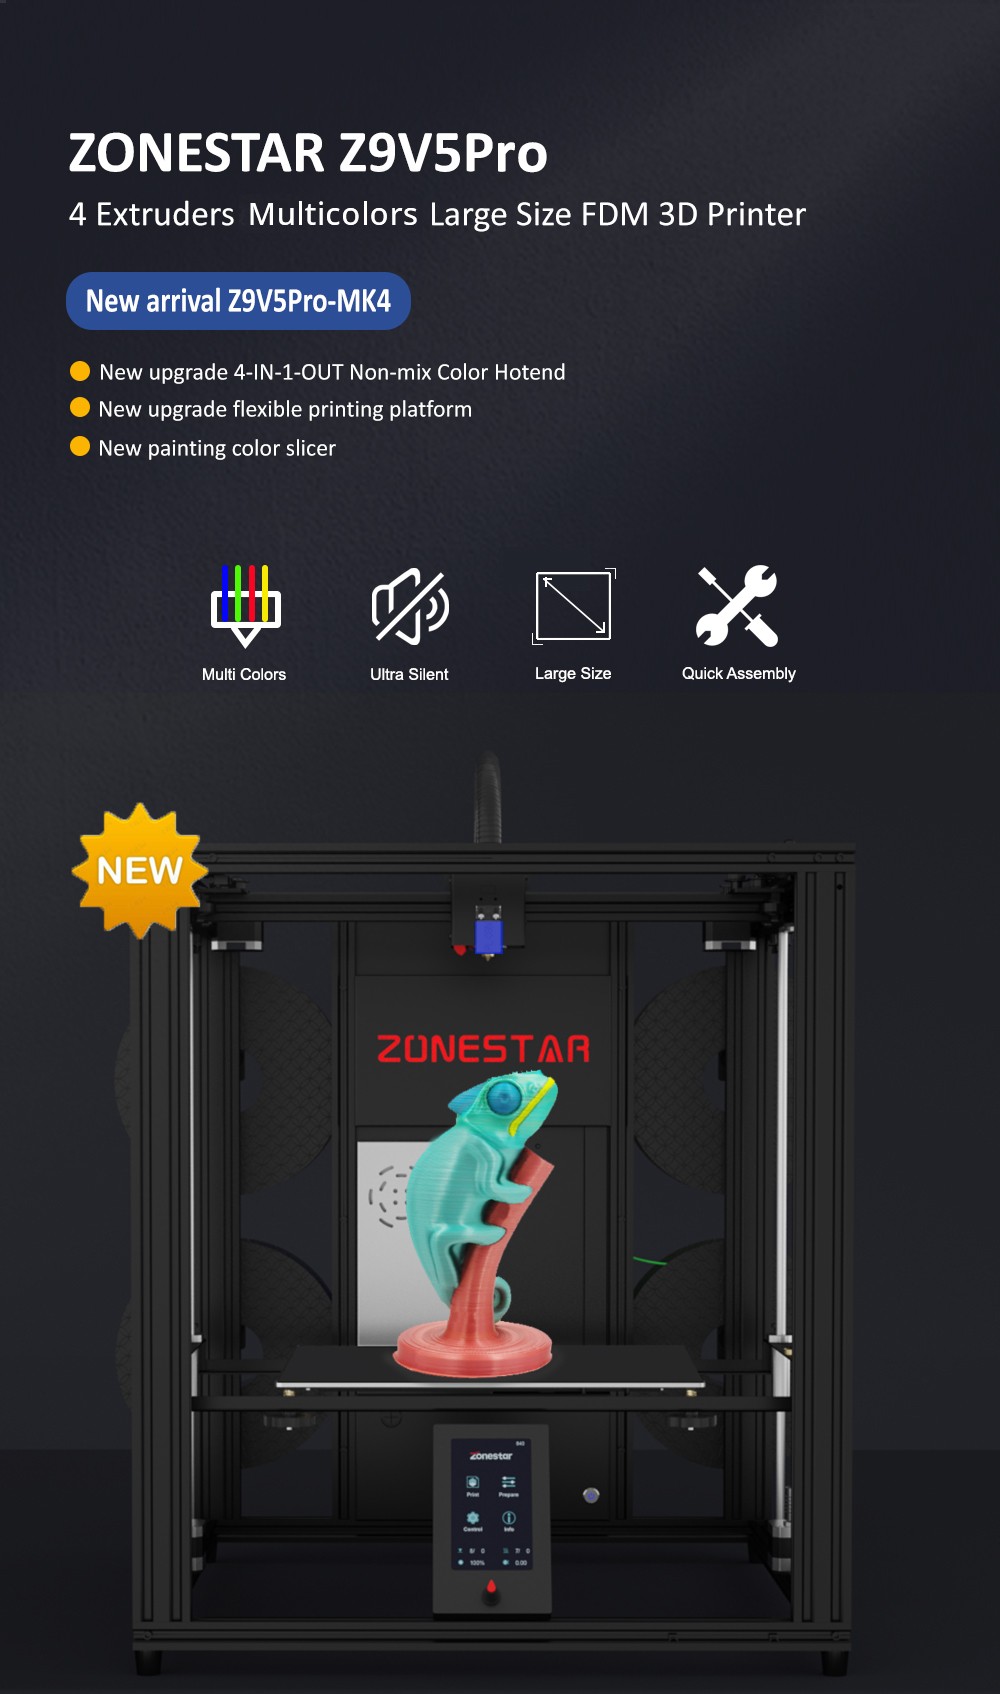 Zonestar Z9V5Pro-MK4 4 Extruders 3D Printer with 4*0.25kg Filament, 4 Colors, Auto Leveling, 32 Bit Control Board, Resume Printing, TFT-LCD, 300x300x400mm